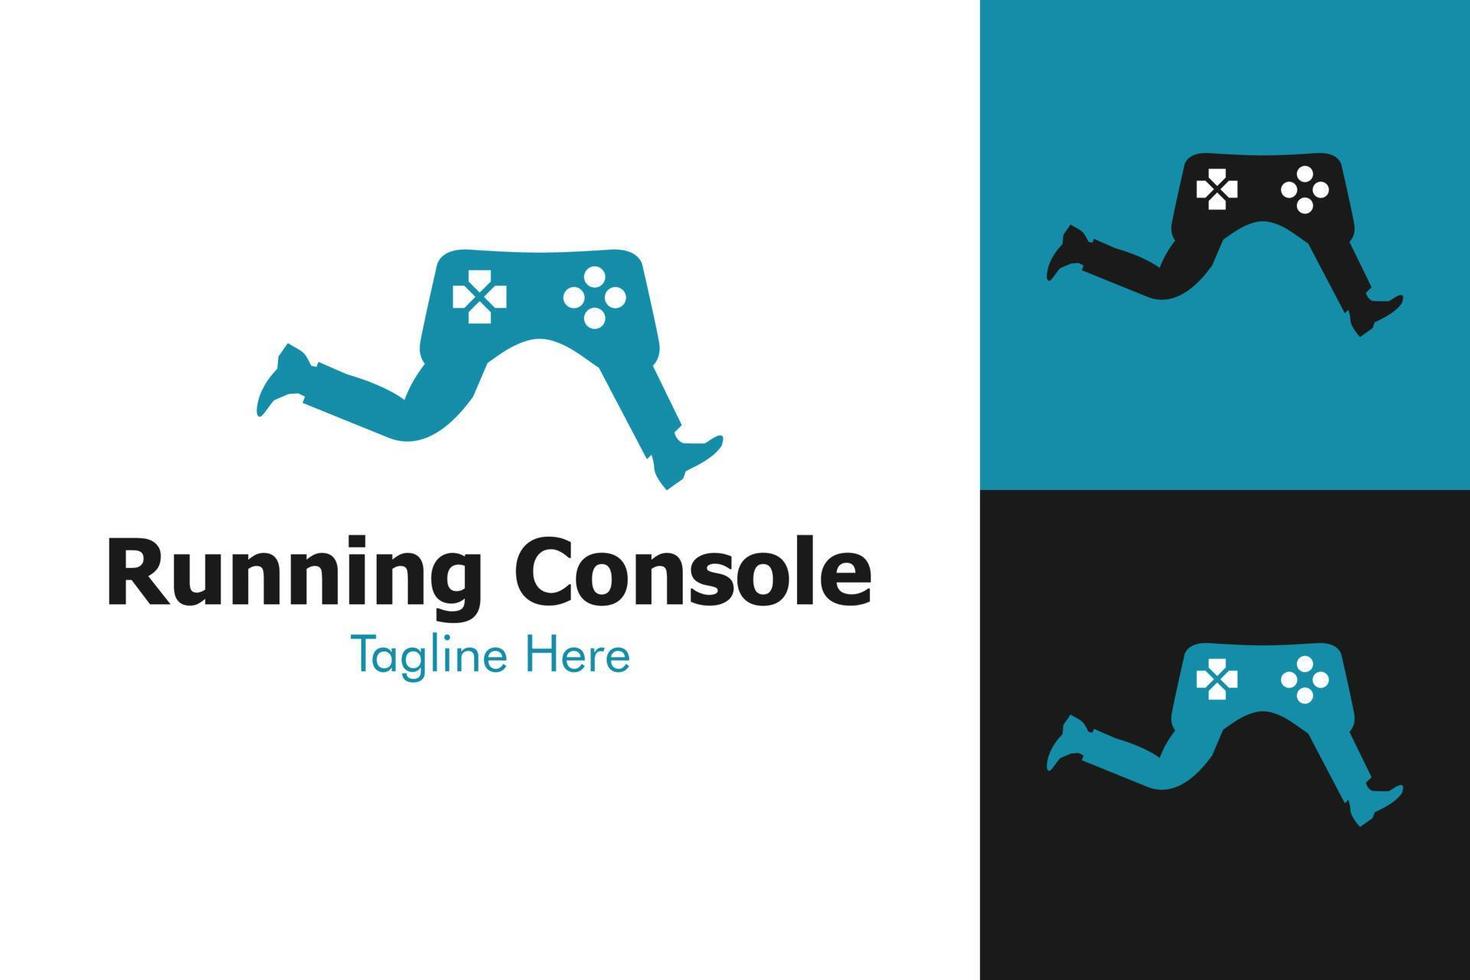 Illustration Vector Graphic of Running Game Console Logo. Perfect to use for Technology Company